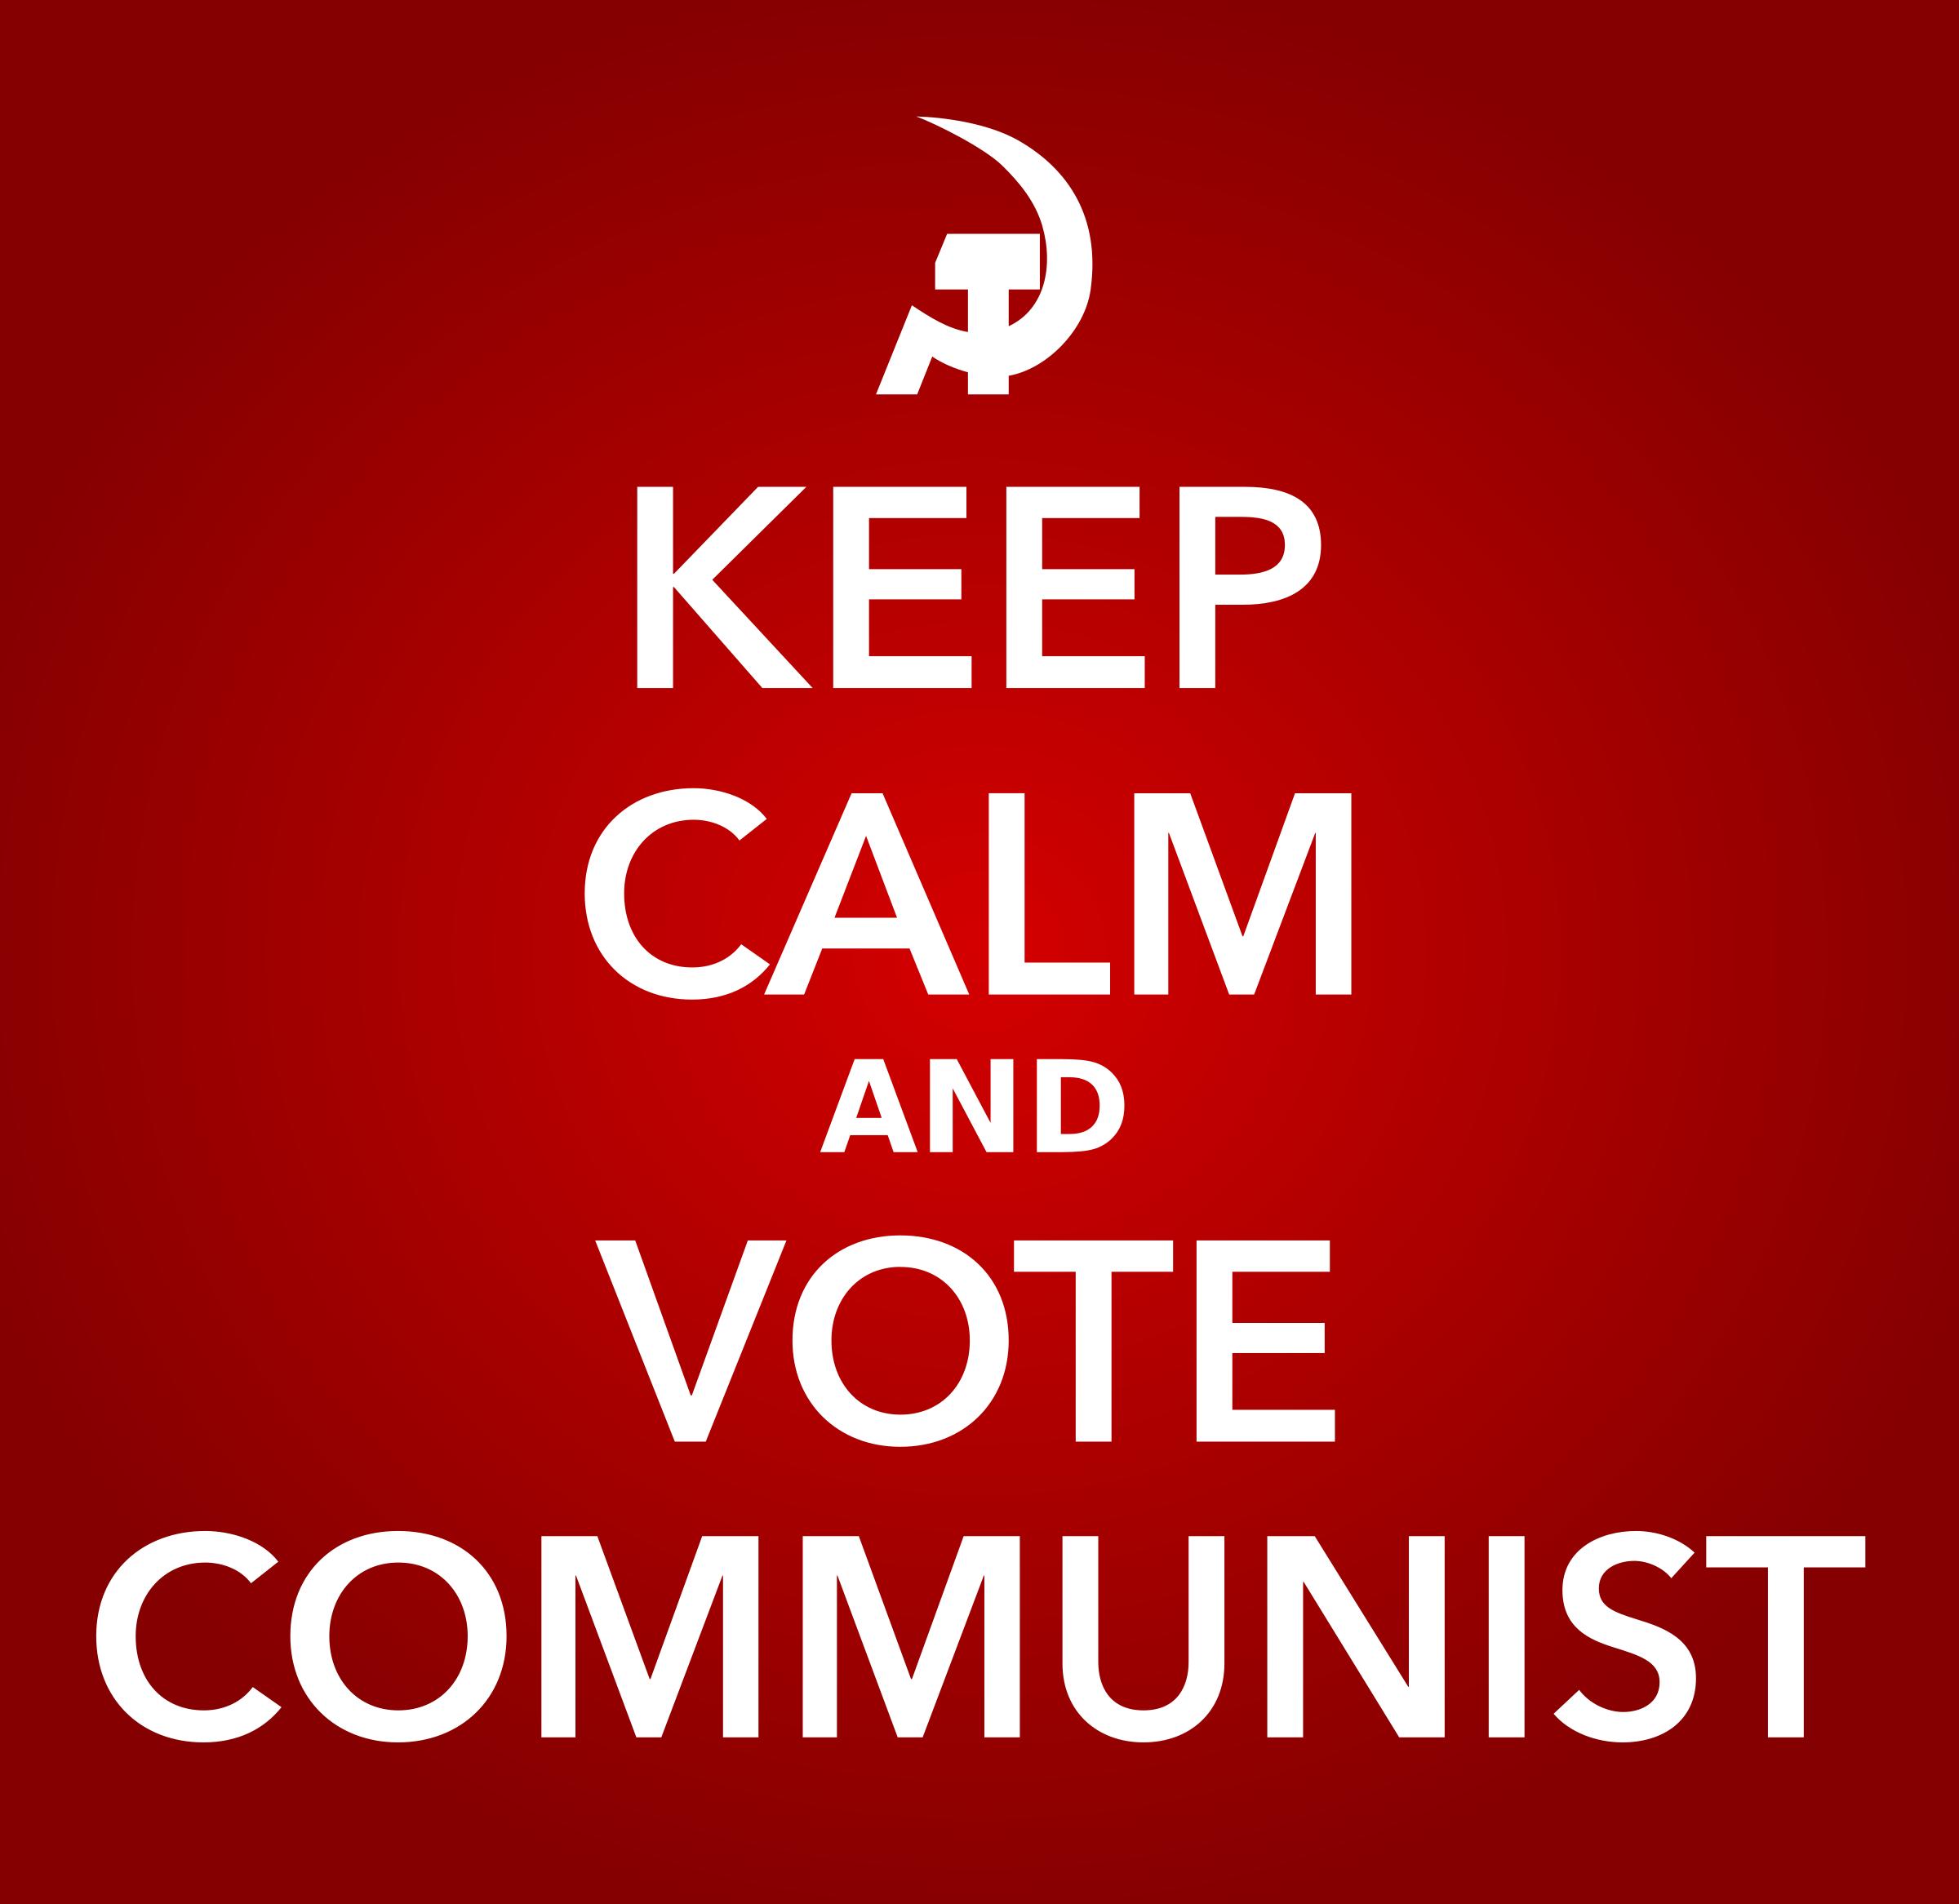 KEEP CALM AND VOTE COMMUNIST png